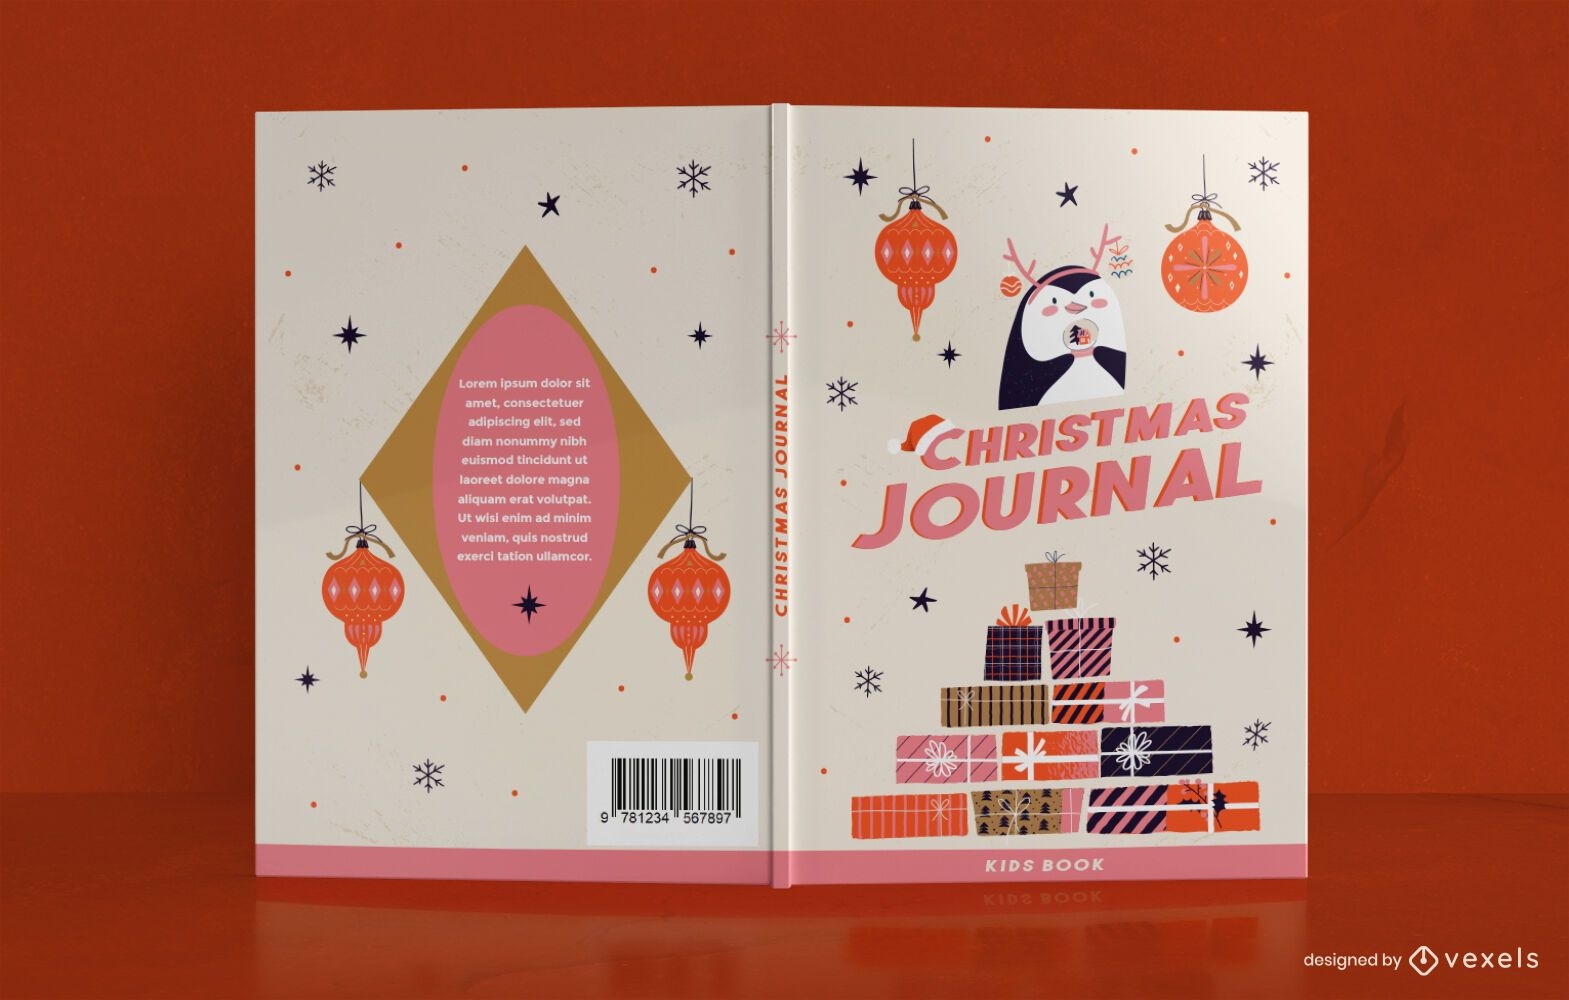 Christmas journal cute book cover design